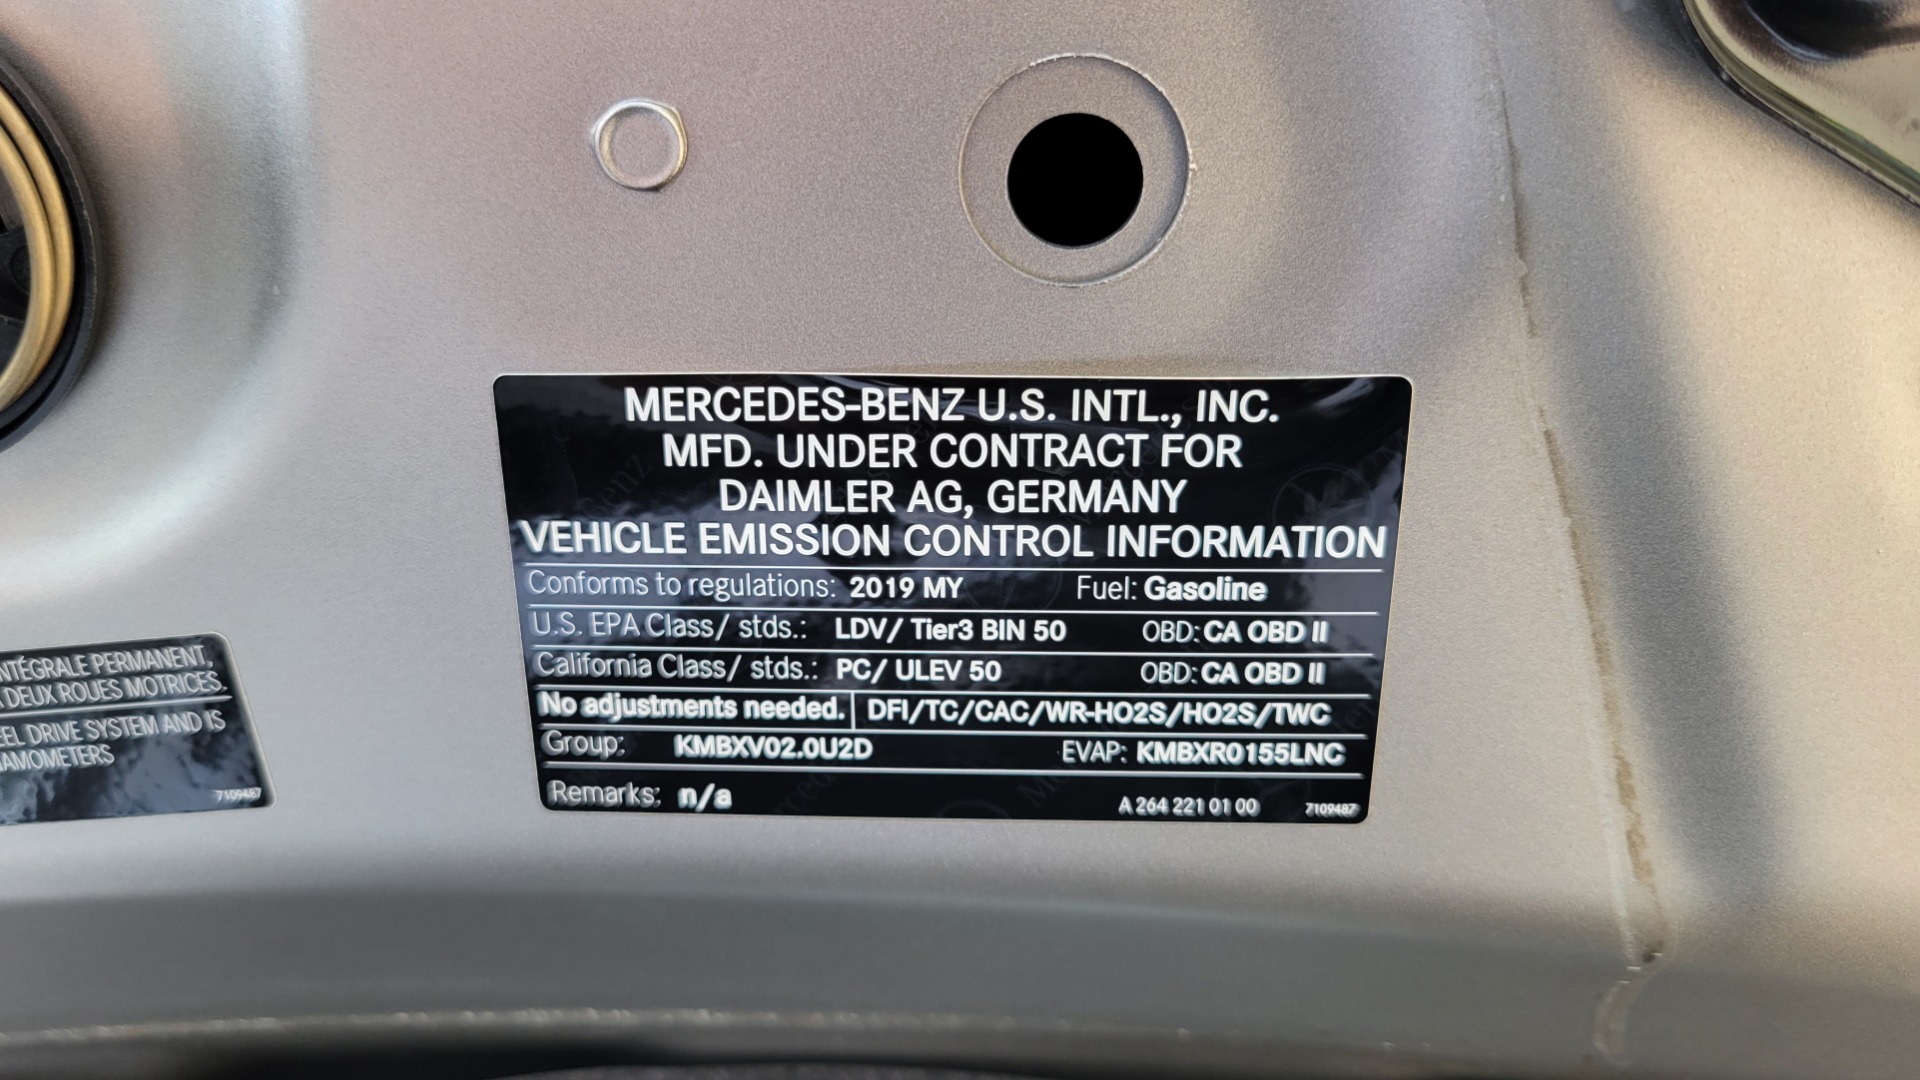 Used 2019 Mercedes-Benz C-CLASS C 300 PREMIUM 4MATIC / BURMESTER / KEYLESS-GO / REARVIEW for sale $37,395 at Formula Imports in Charlotte NC 28227 13